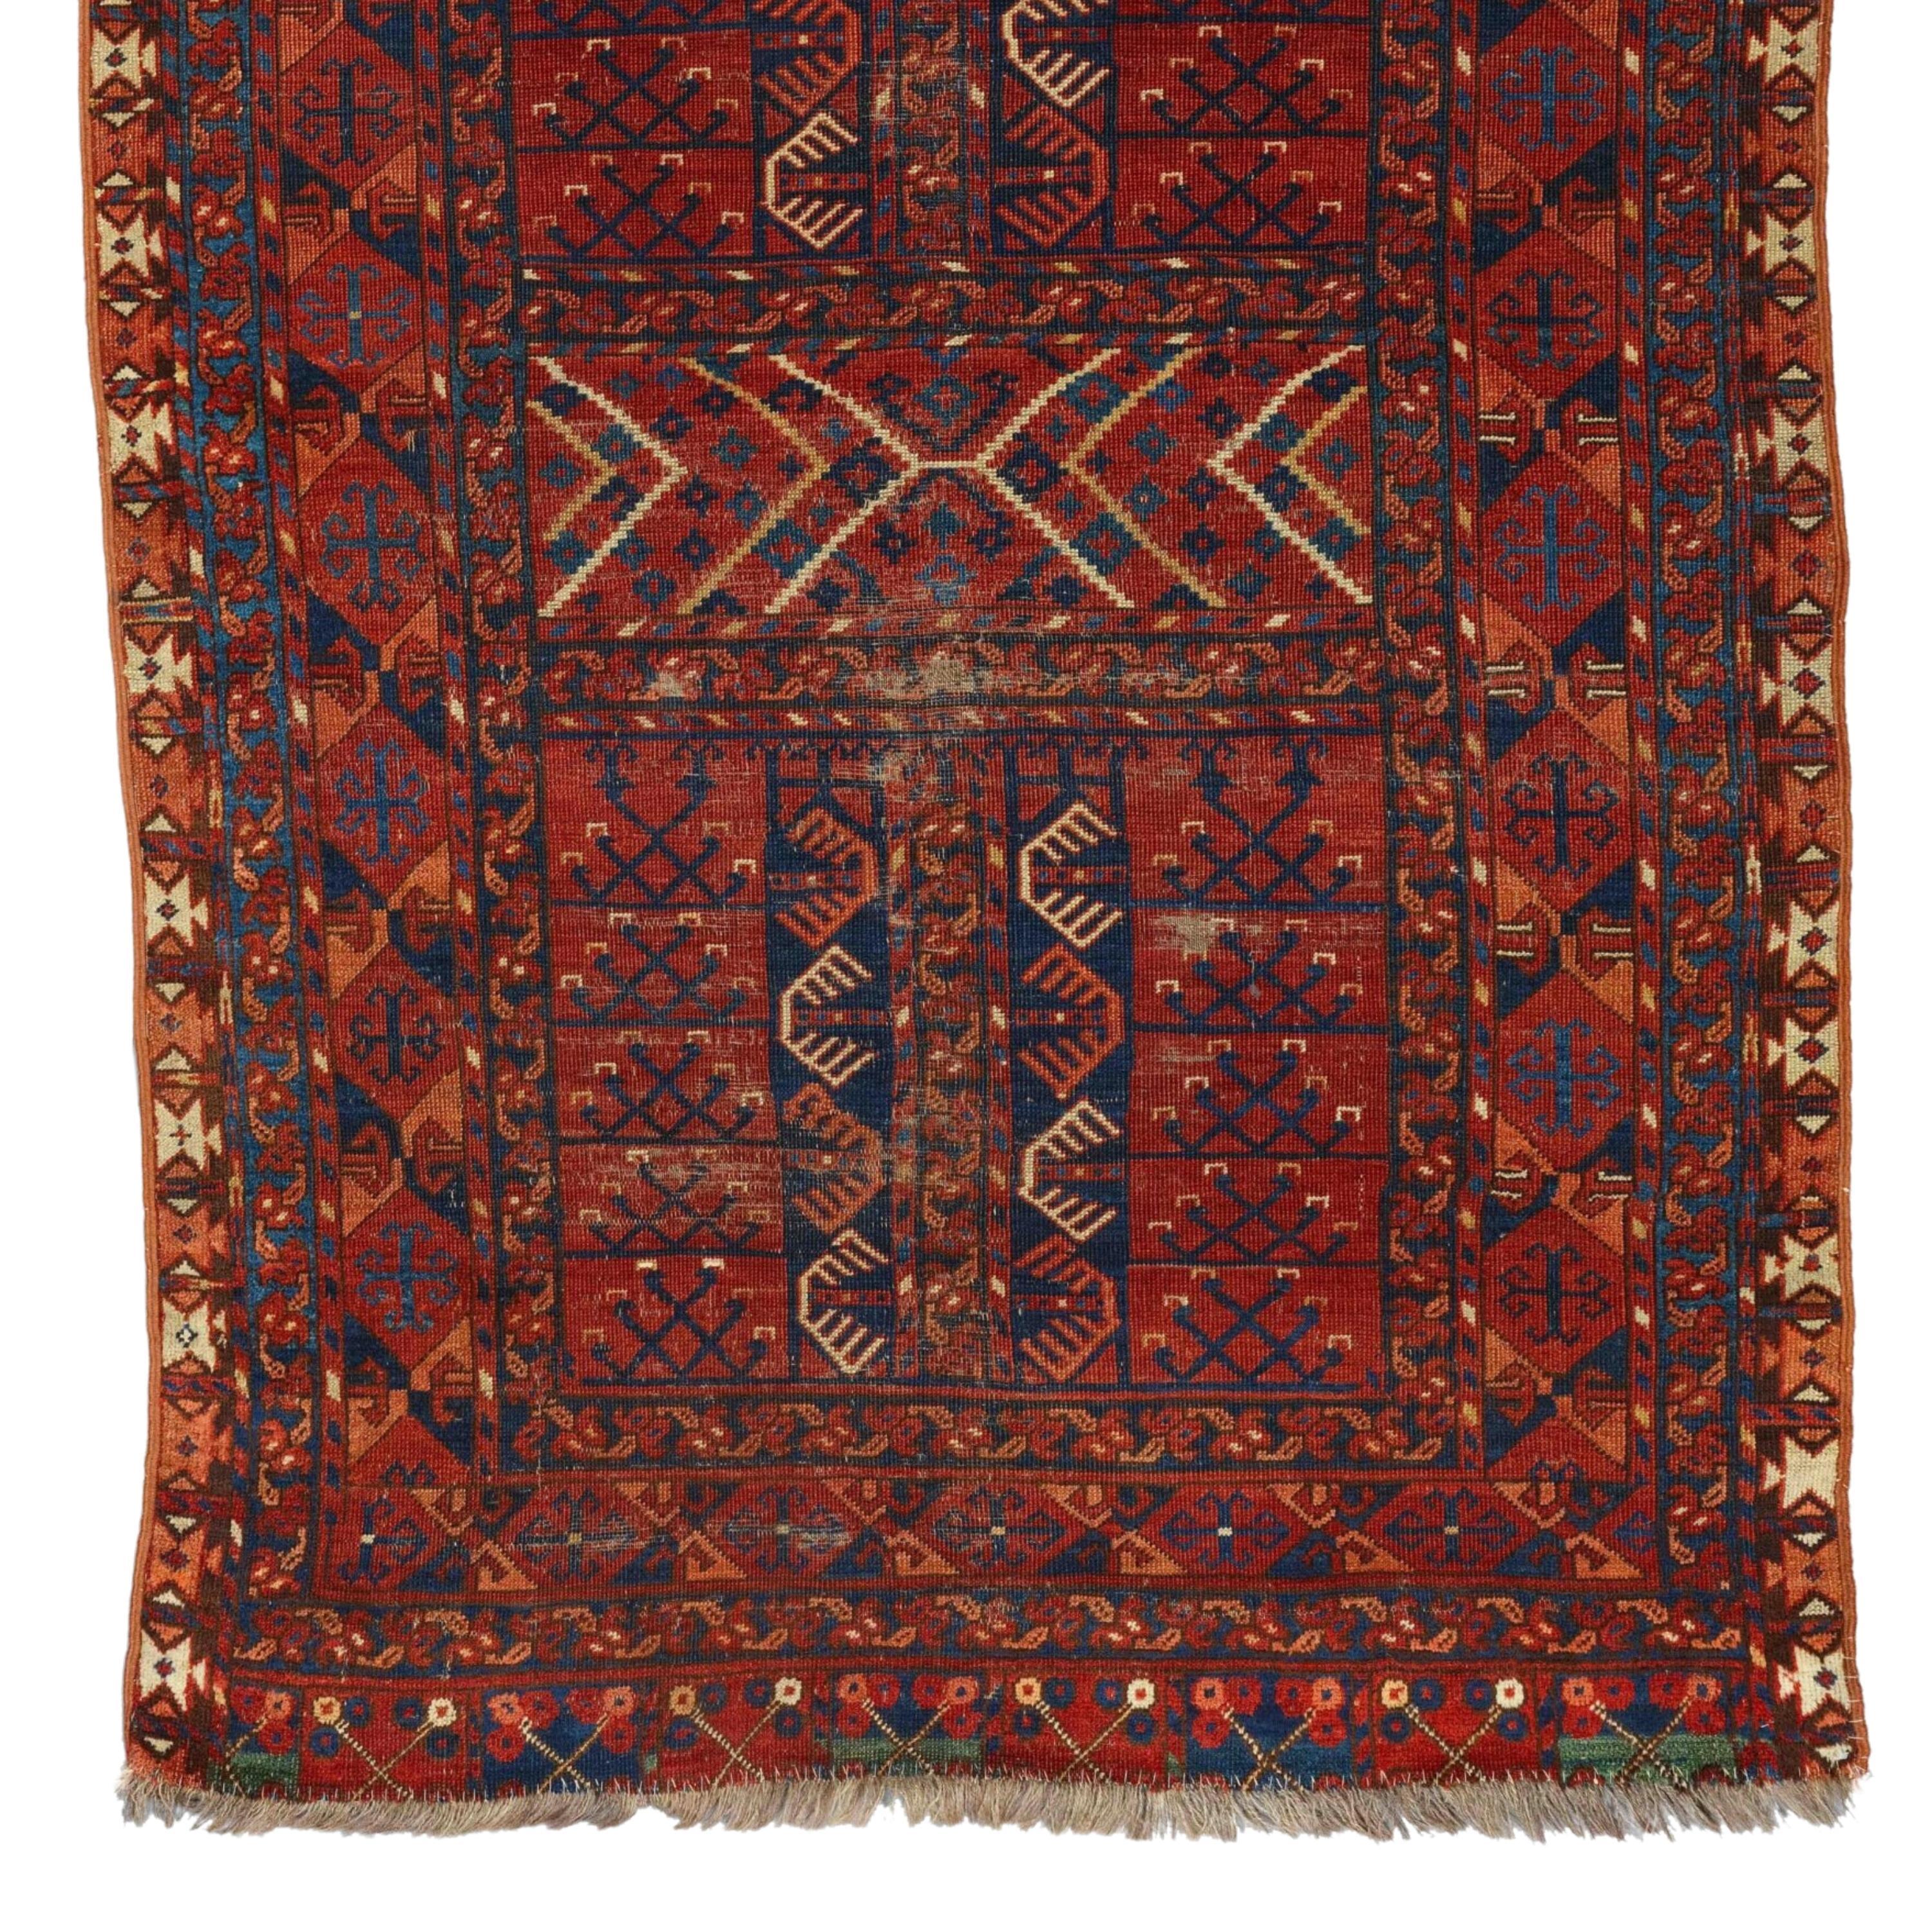 Middle of 19th Century Turkmen Ersari Ensi  Antique Rug
Size 130 x 190 cm

This Turkmen Ersari Ensi carpet is a work of art woven in Turkmenistan in the mid-19th century. This carpet, dominated by dark red color, has geometric patterns enriched with